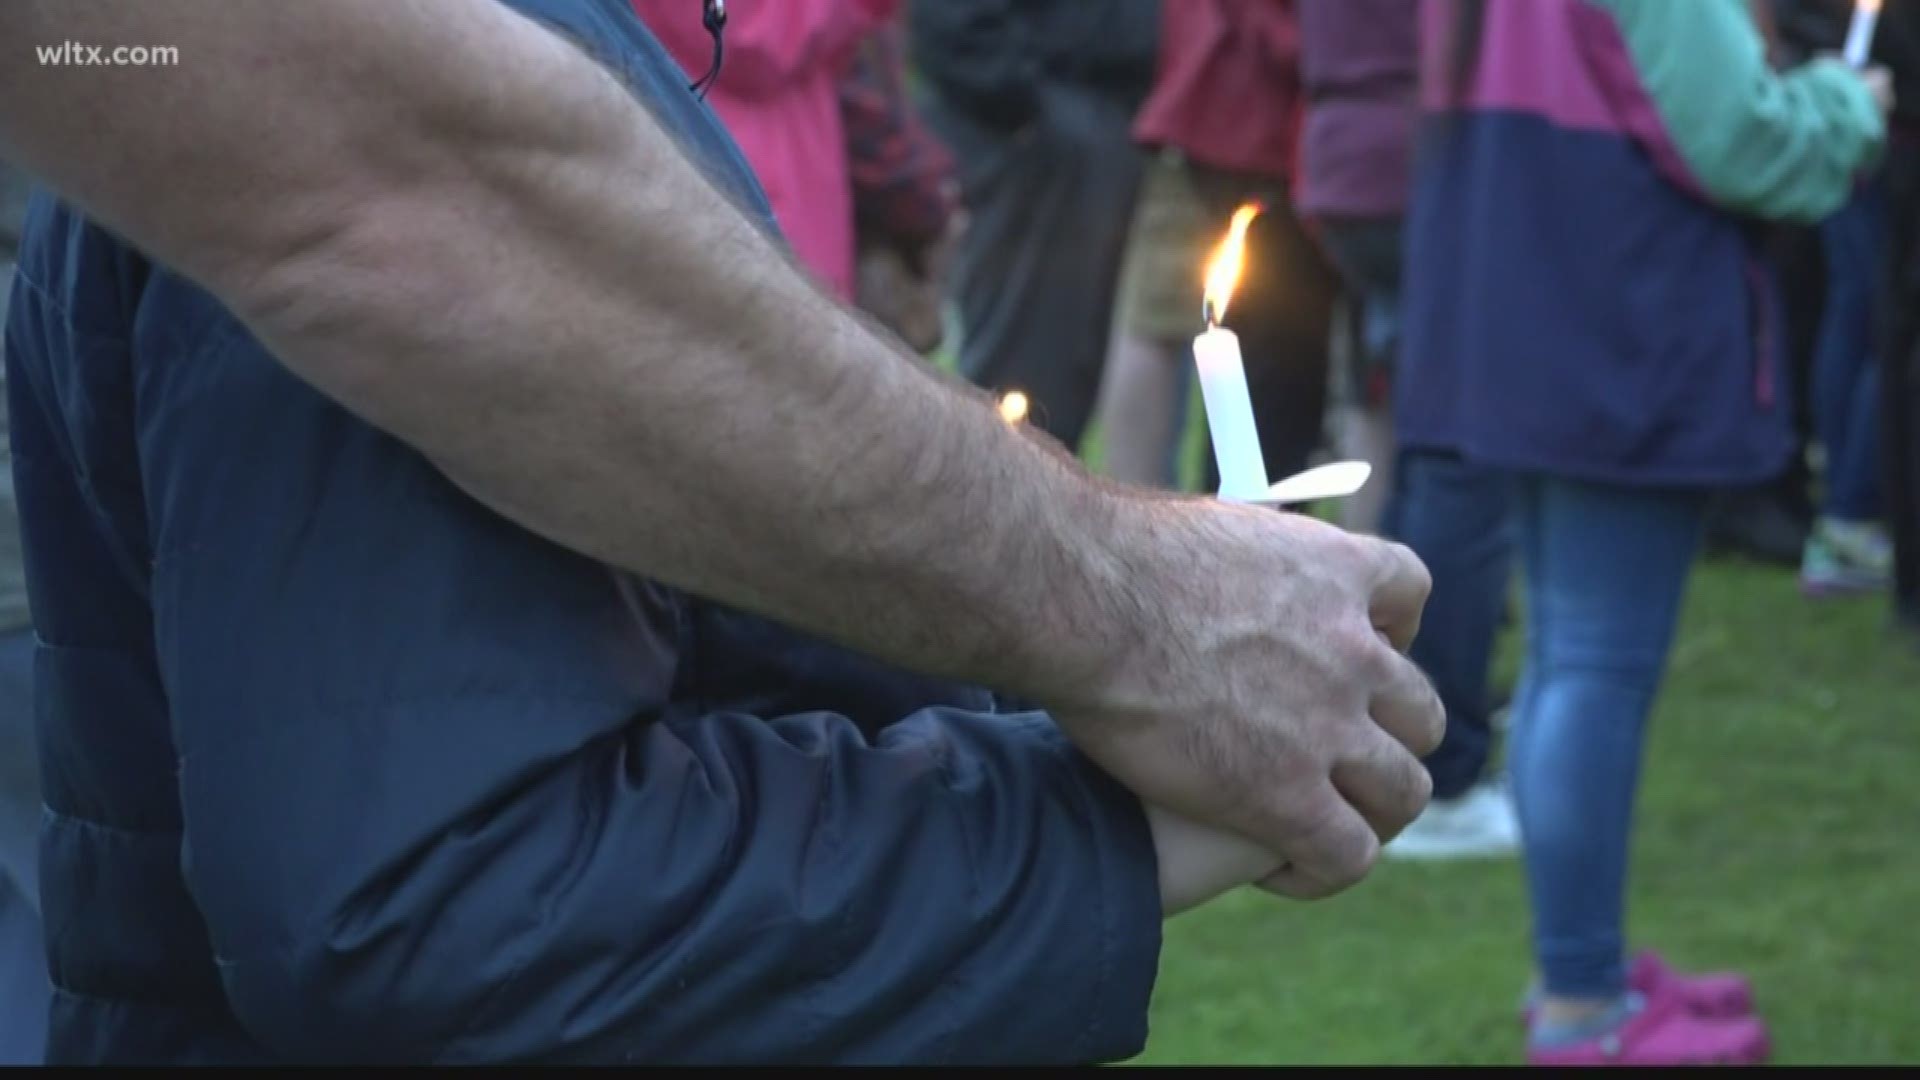 The City of Cayce held a community candlelight vigil Tuesday night in memory of Faye Swetlik.